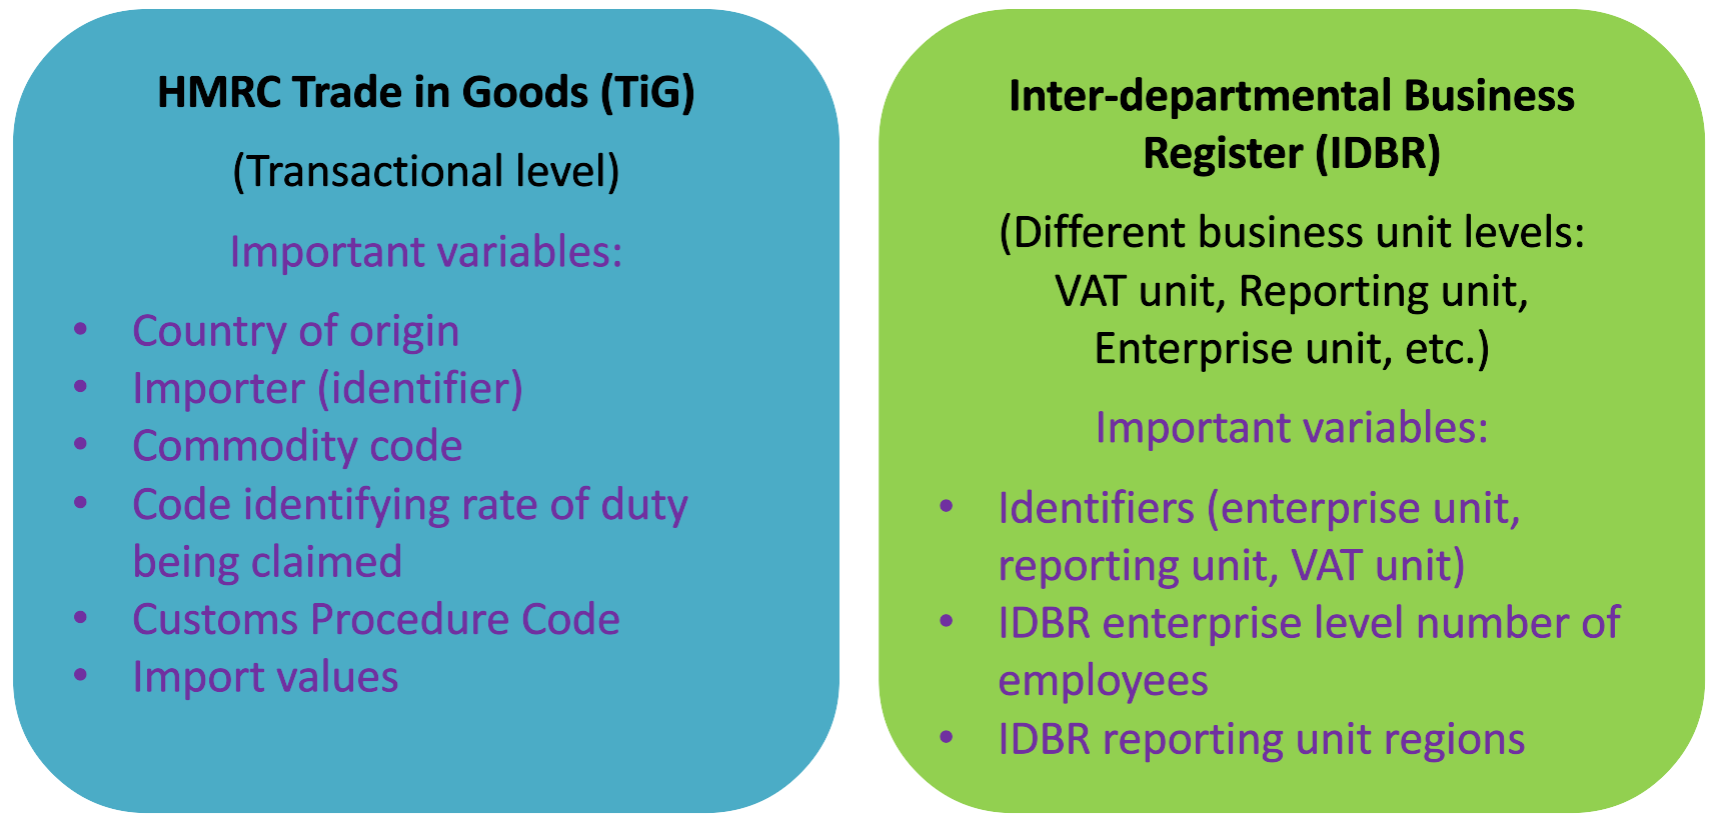 Important information in the Trade in Goods data and the Inter-departmental Business Register that are required for firm-level preferential utilisation analysis.